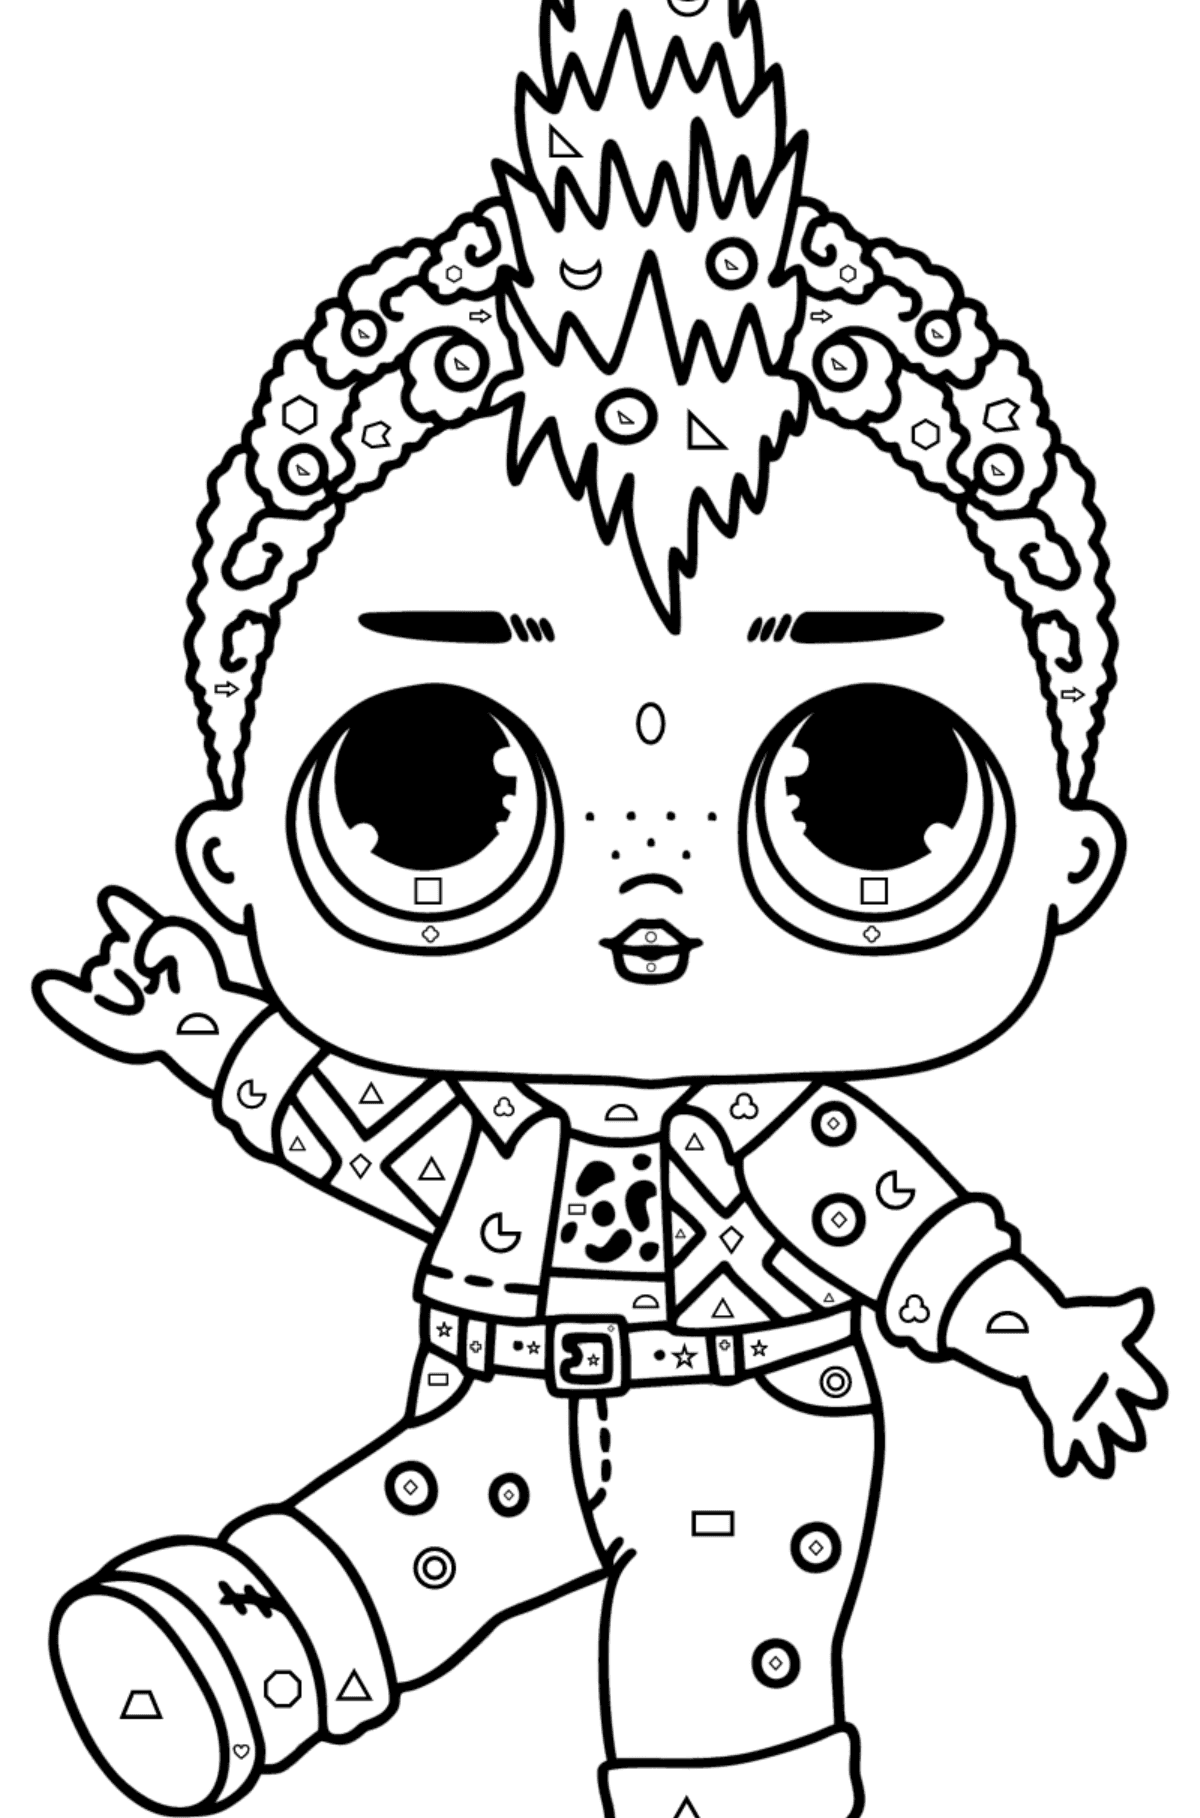 Colouring page LOL Surprise Punk Boi - Coloring by Geometric Shapes for Kids